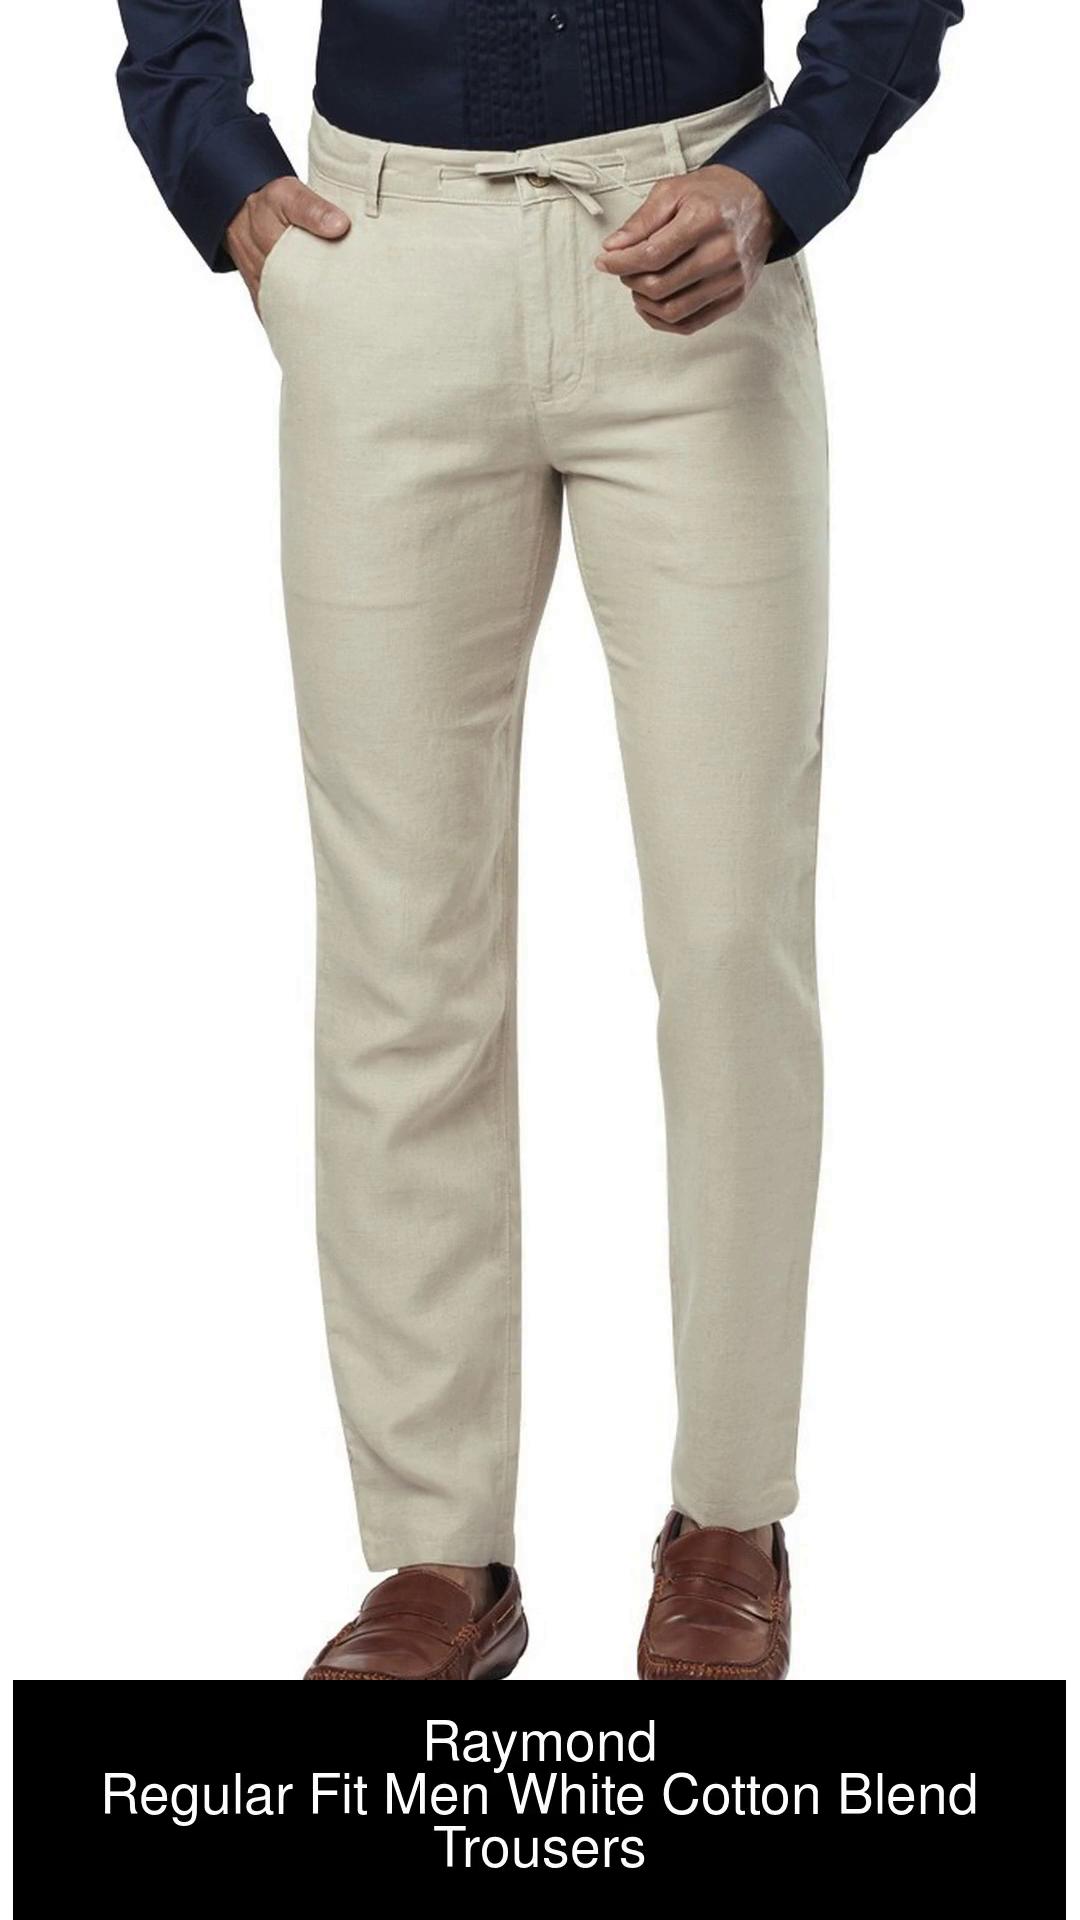 SOLID WHITE TROUSERS FOR MENS  Pants outfit men White pants men Men  fashion casual shirts